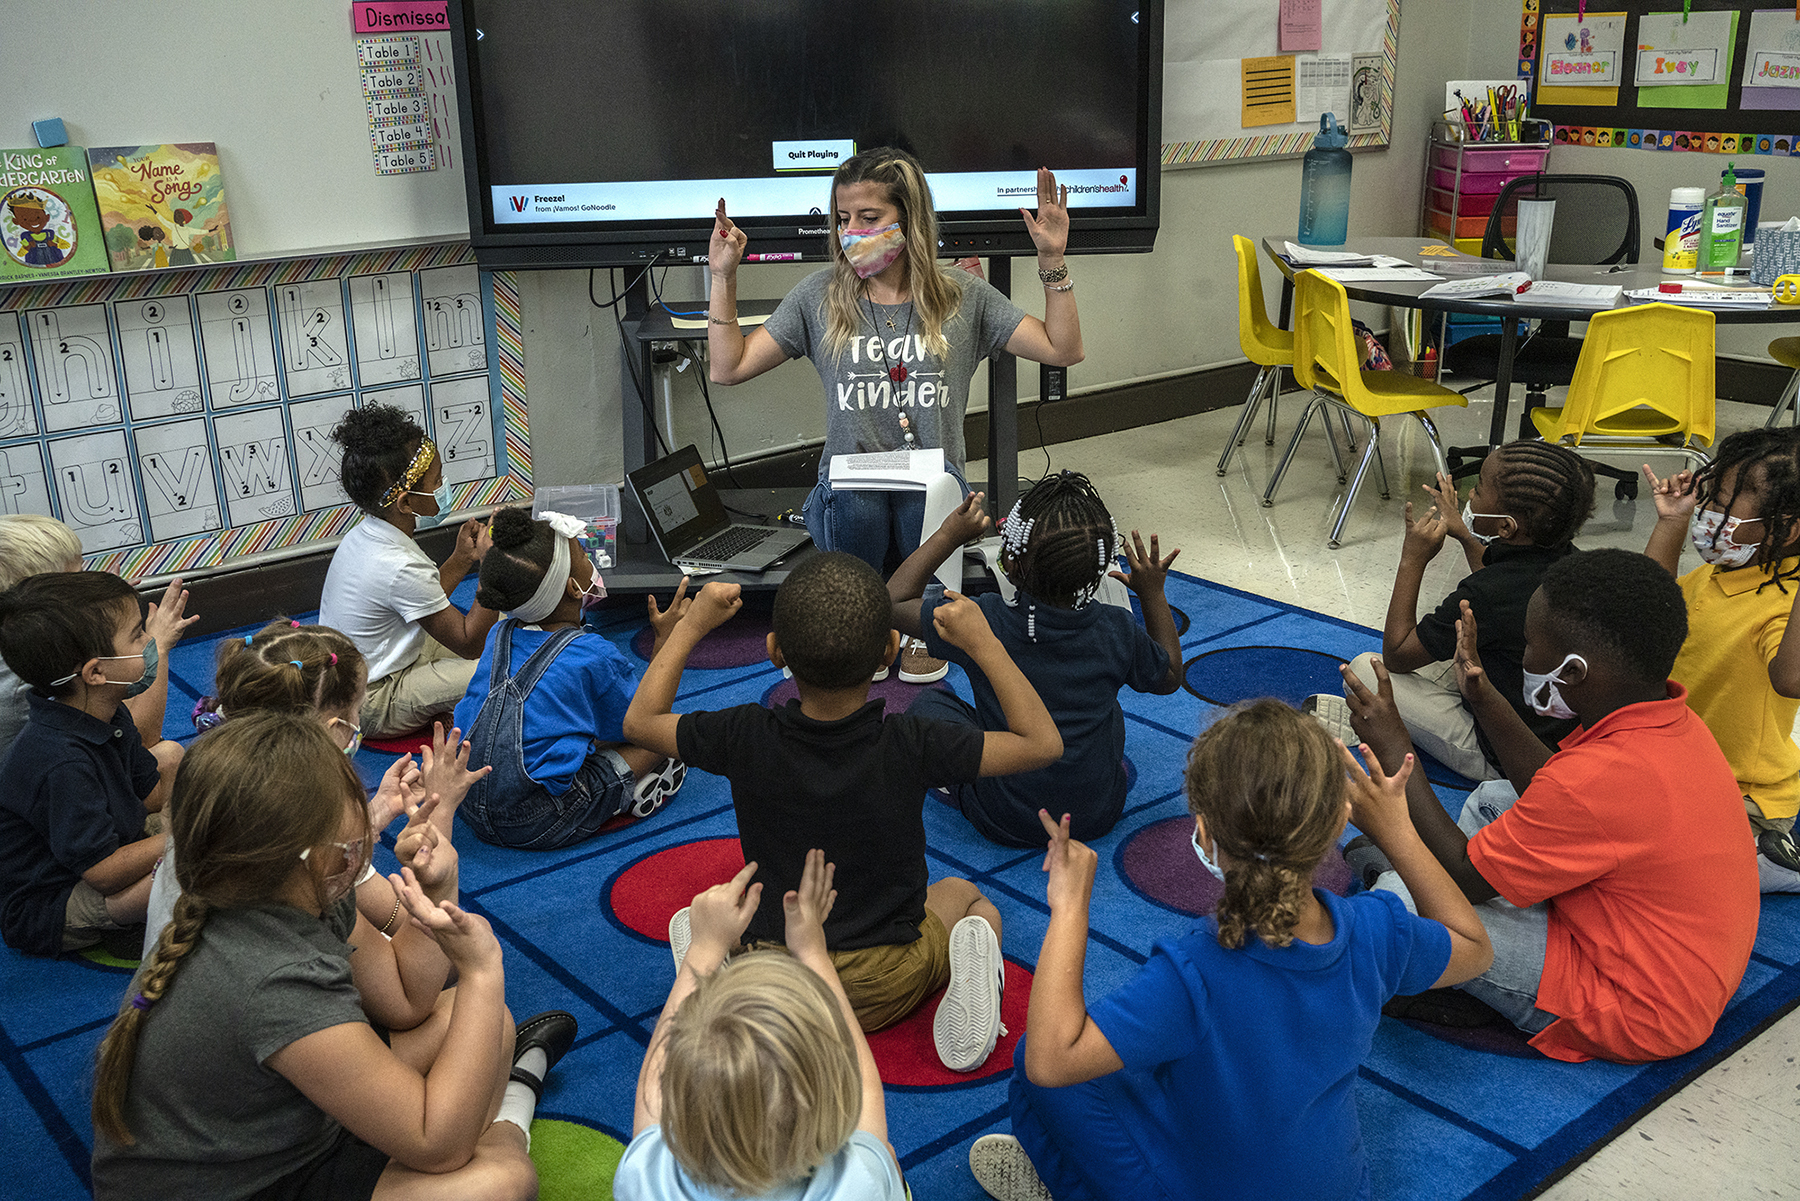 Kindergarten teacher Mrs. Amber Updegrove interacts with her students at Warner Arts Magnet Elementary in Nashville, Tennessee, on Friday, Aug. 20, 2021. All of her students were masked up at the school